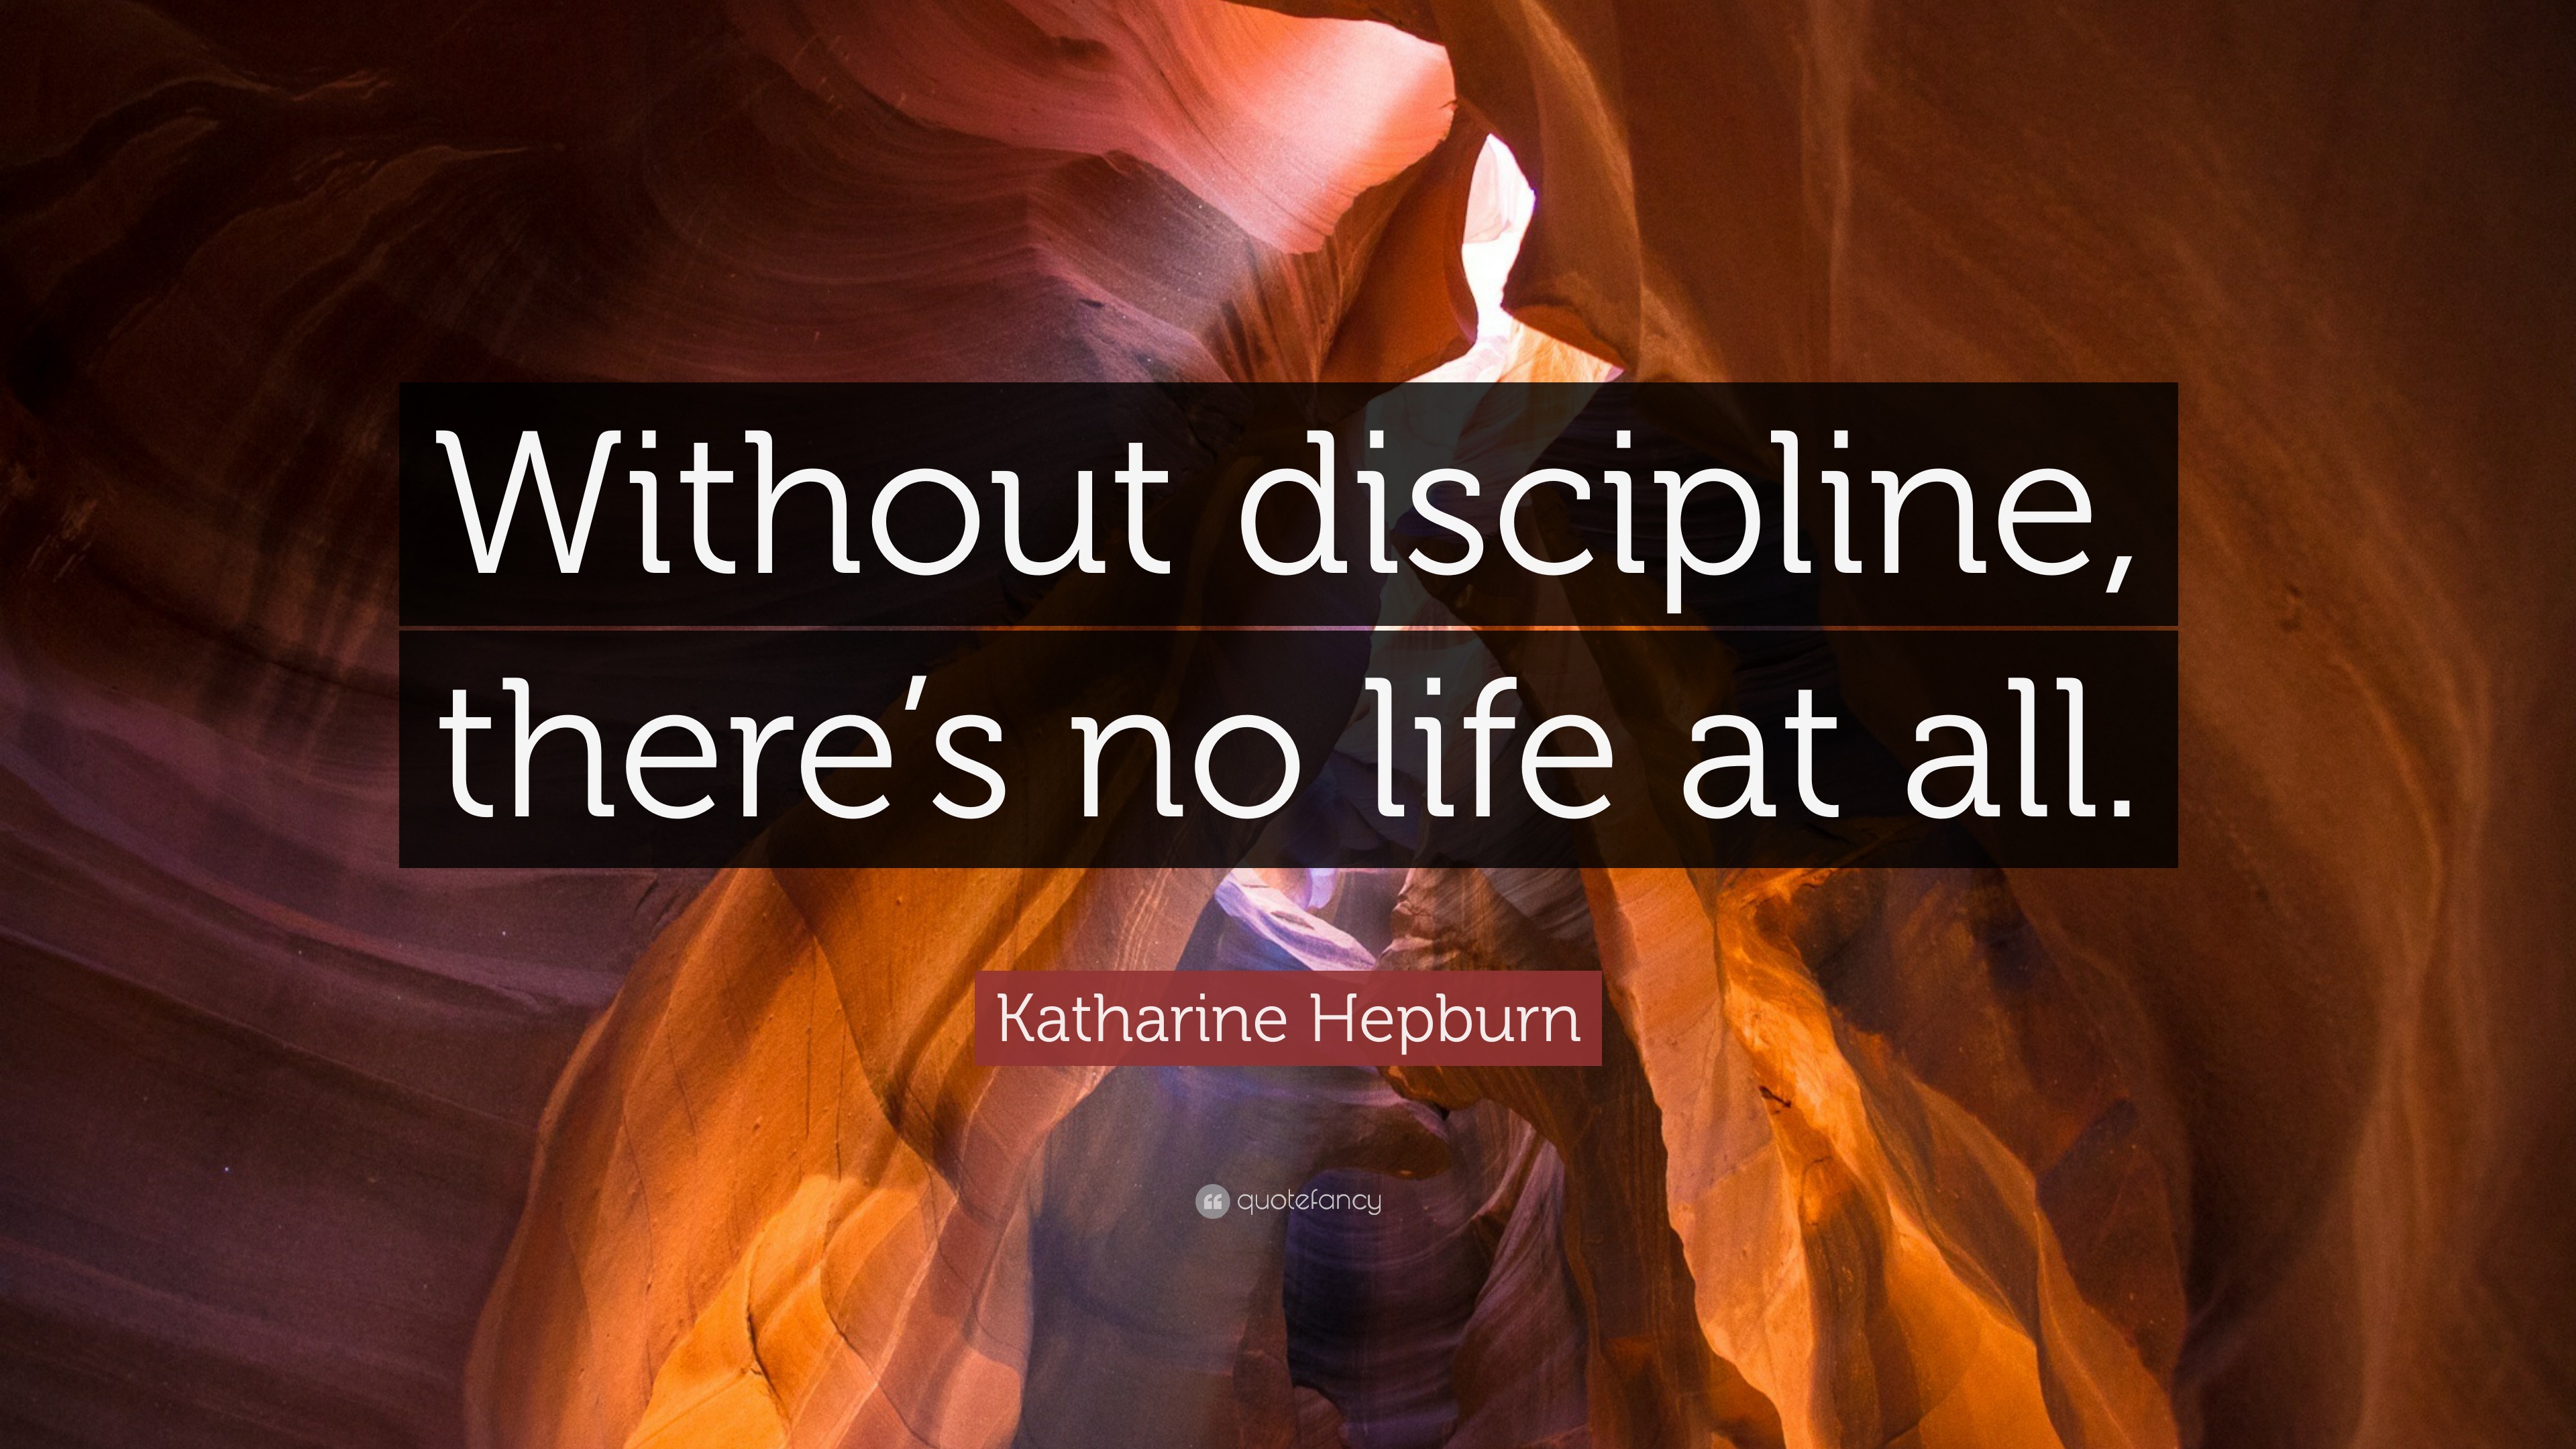 NEW POSTER There is No Life at All Katharine Hepburn Without Discipline